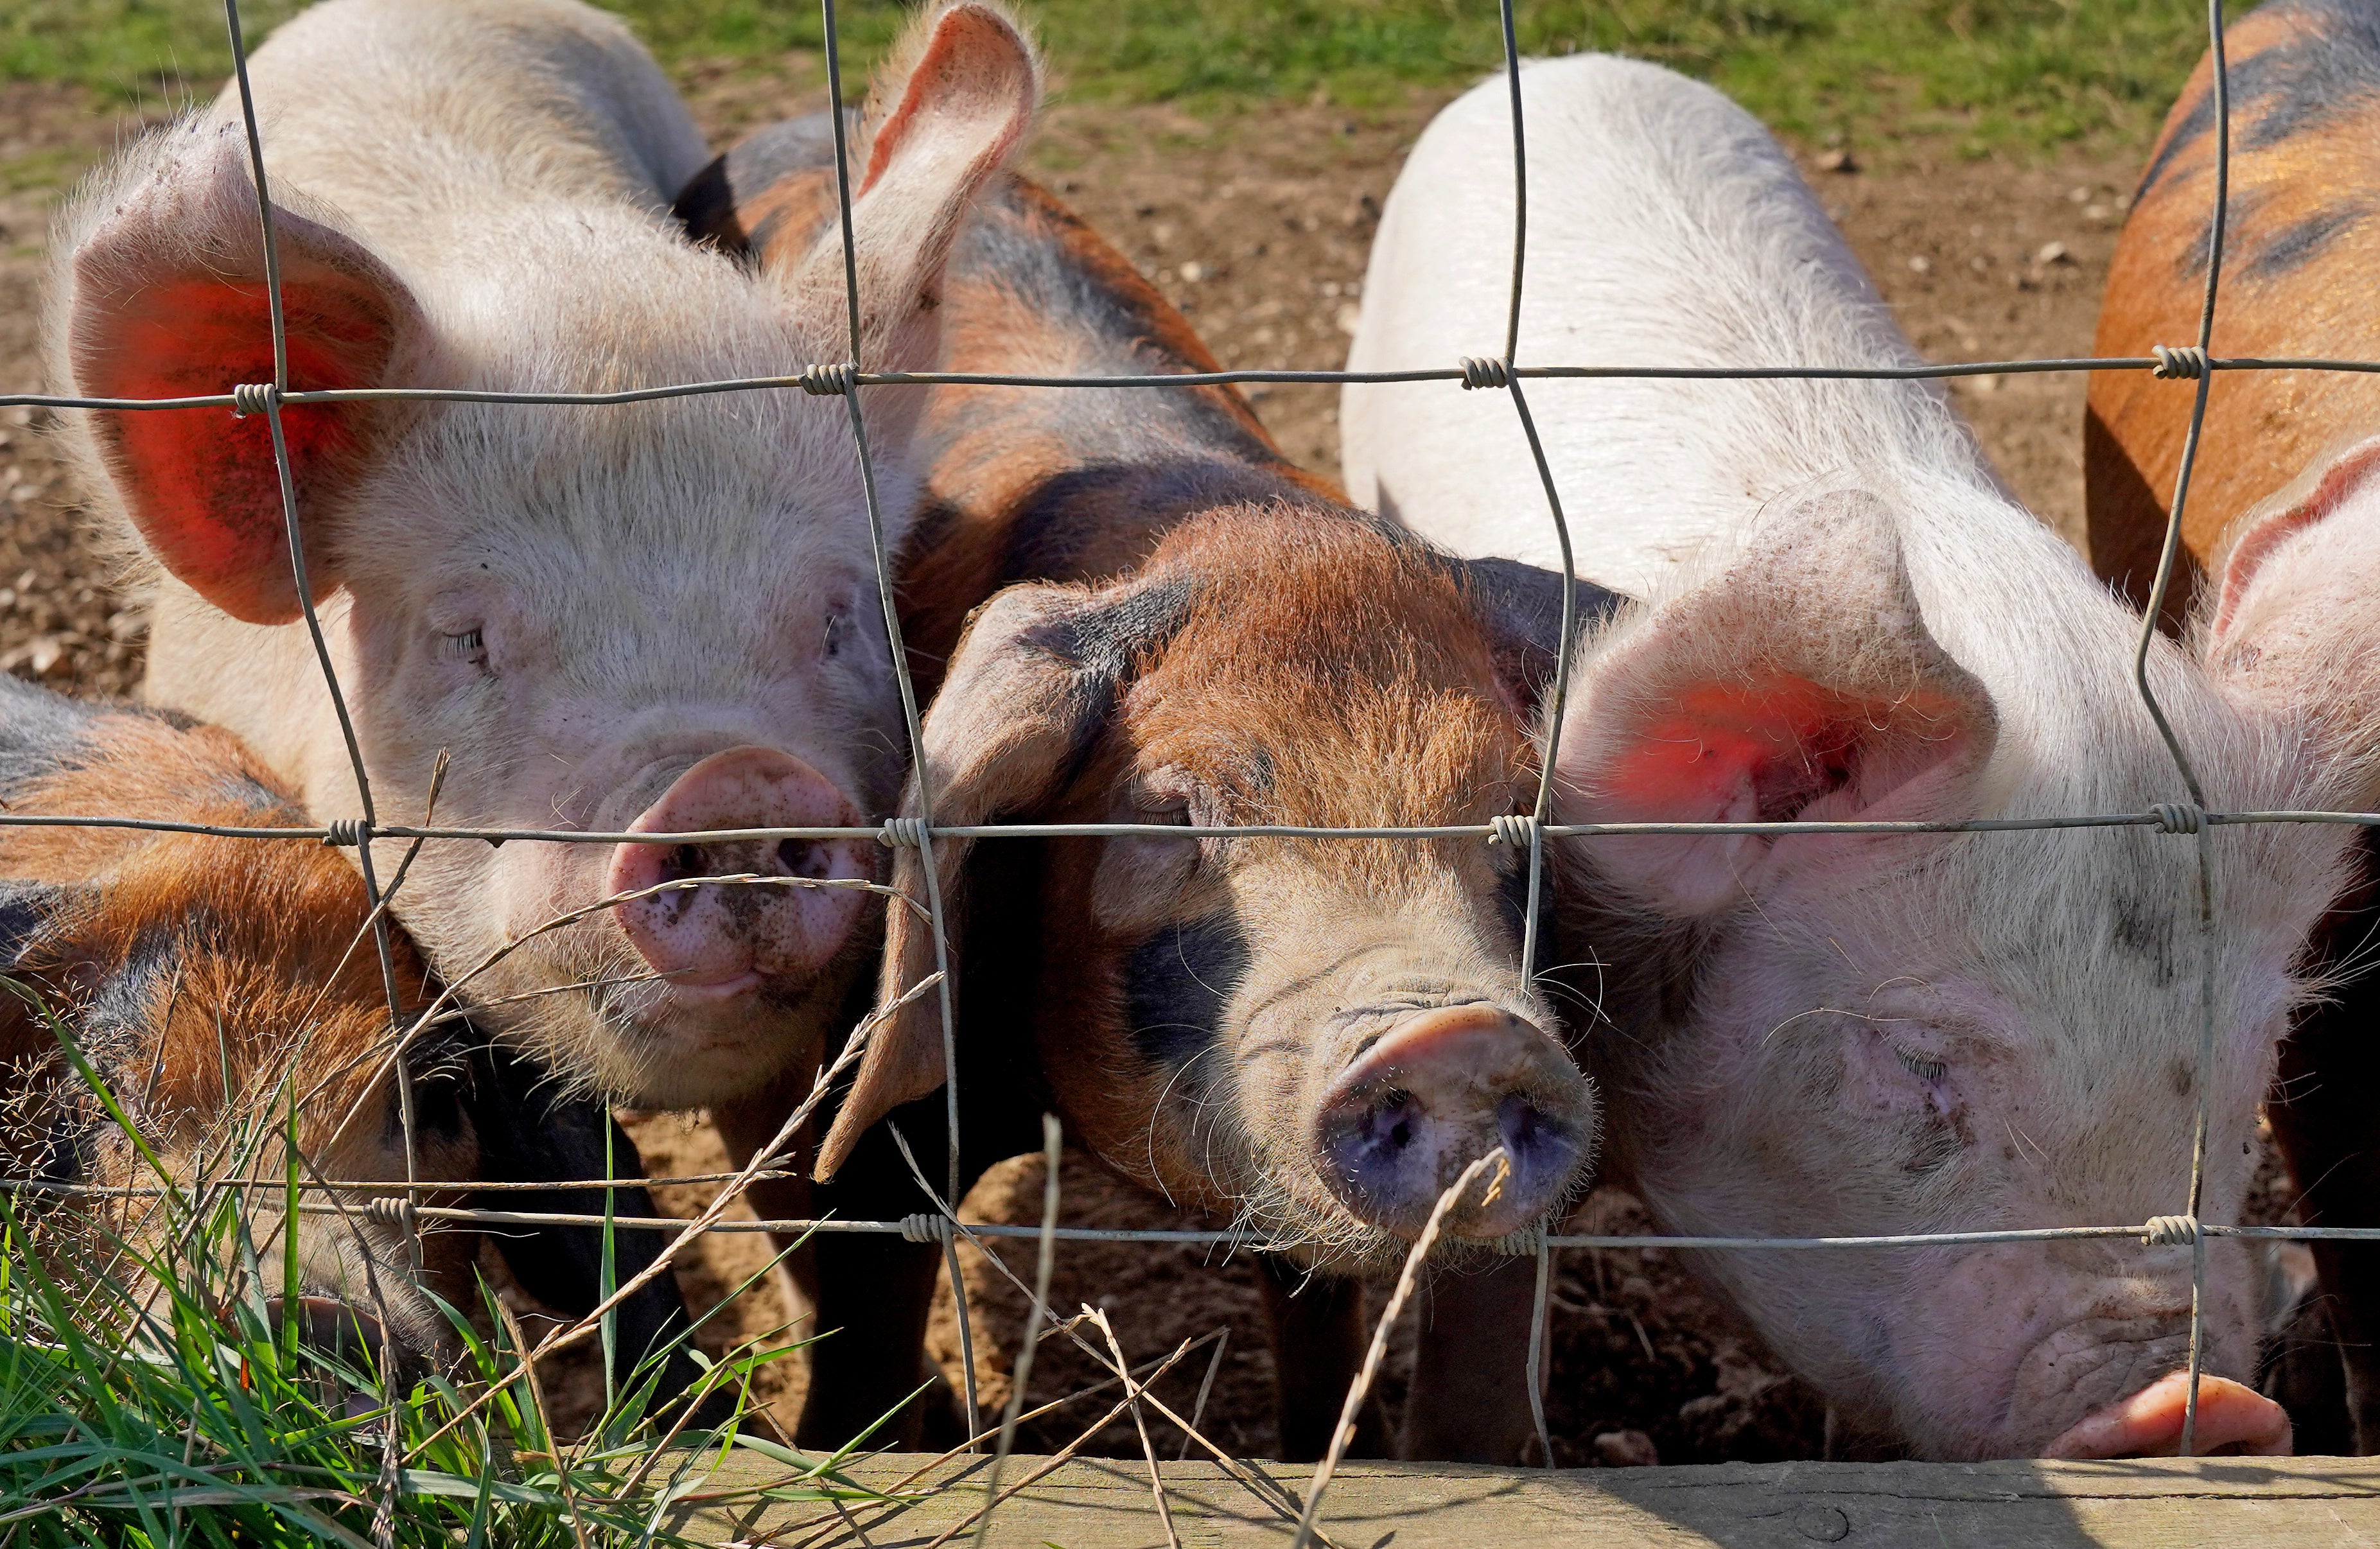 File photo of pigs on a farm (Gareth Fuller/PA Wire)